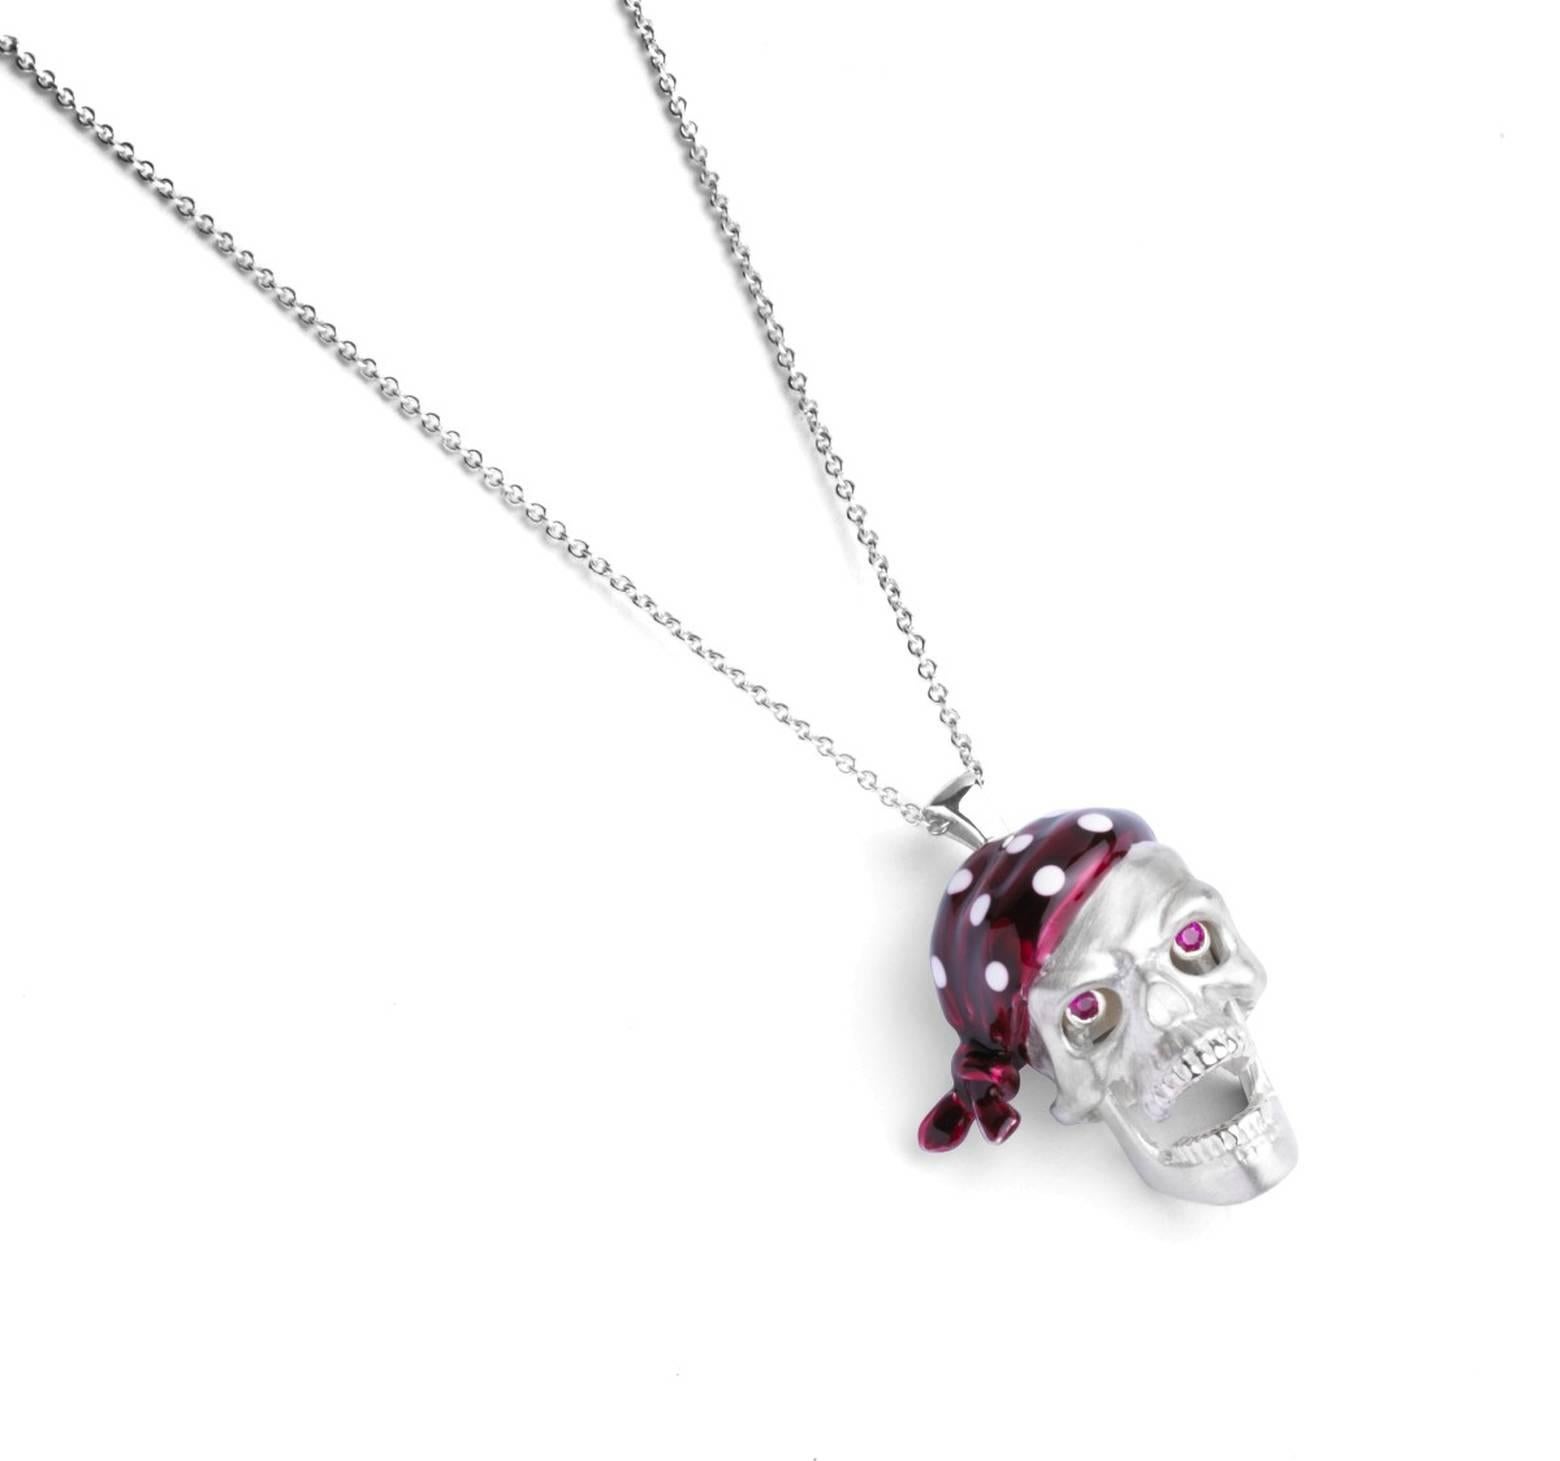 
The sterling silver pirate skull pendant has a n opening jaw and popping ruby eyes. With a red enamel bandana it is fitted on to a 15